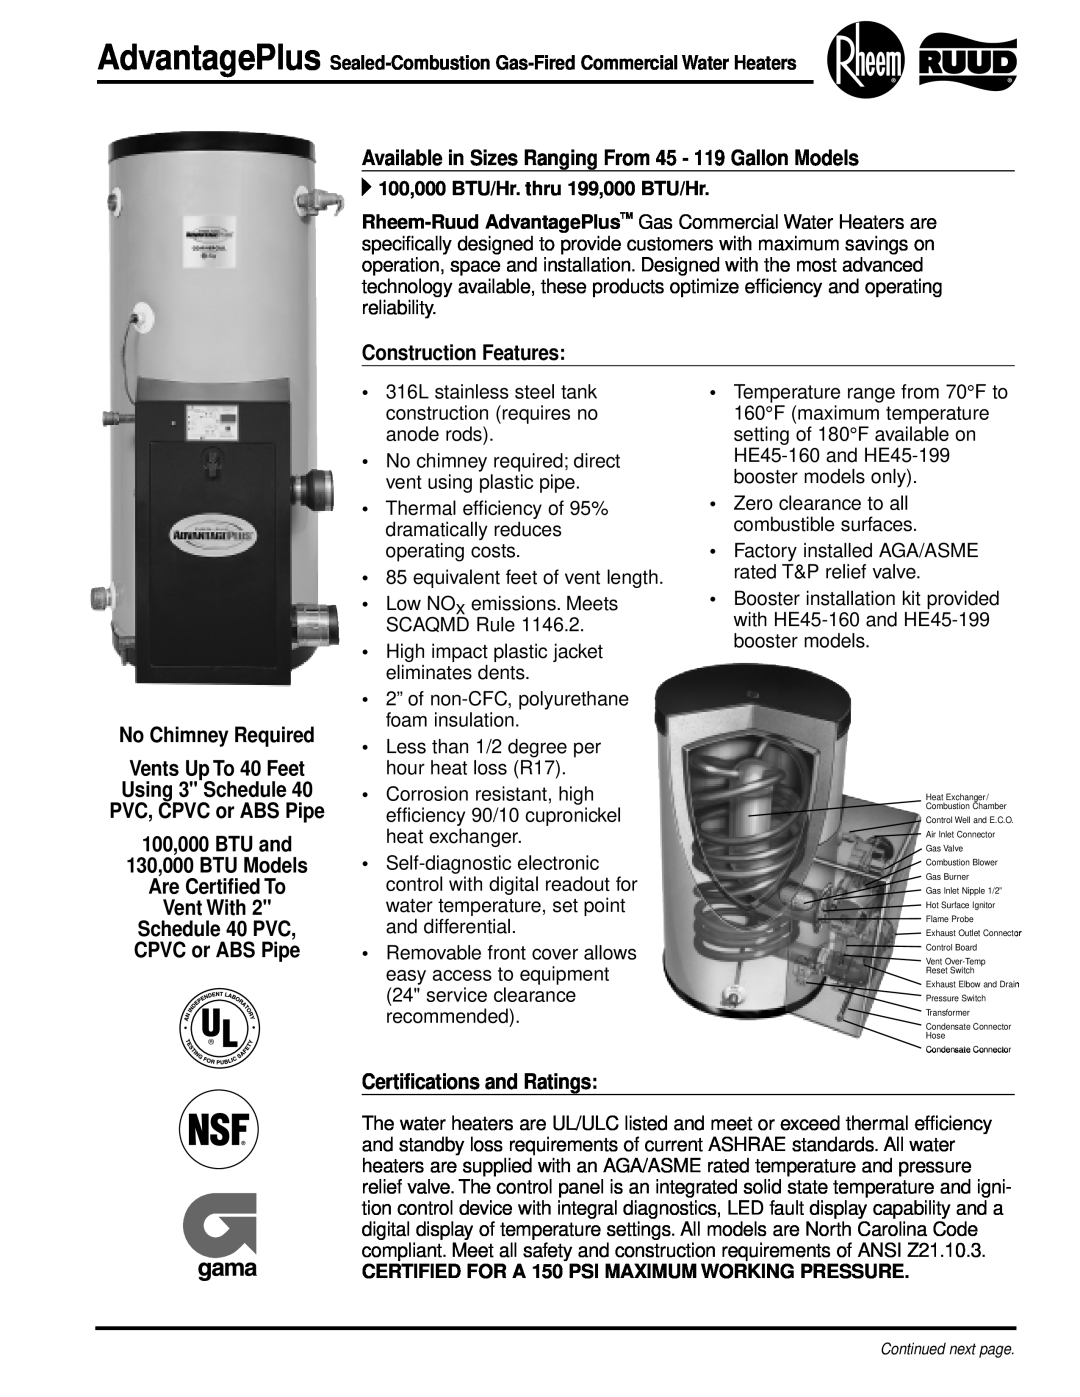 Rheem 100, 130 manual Available in Sizes Ranging From 45 - 119 Gallon Models, Construction Features, No Chimney Required 